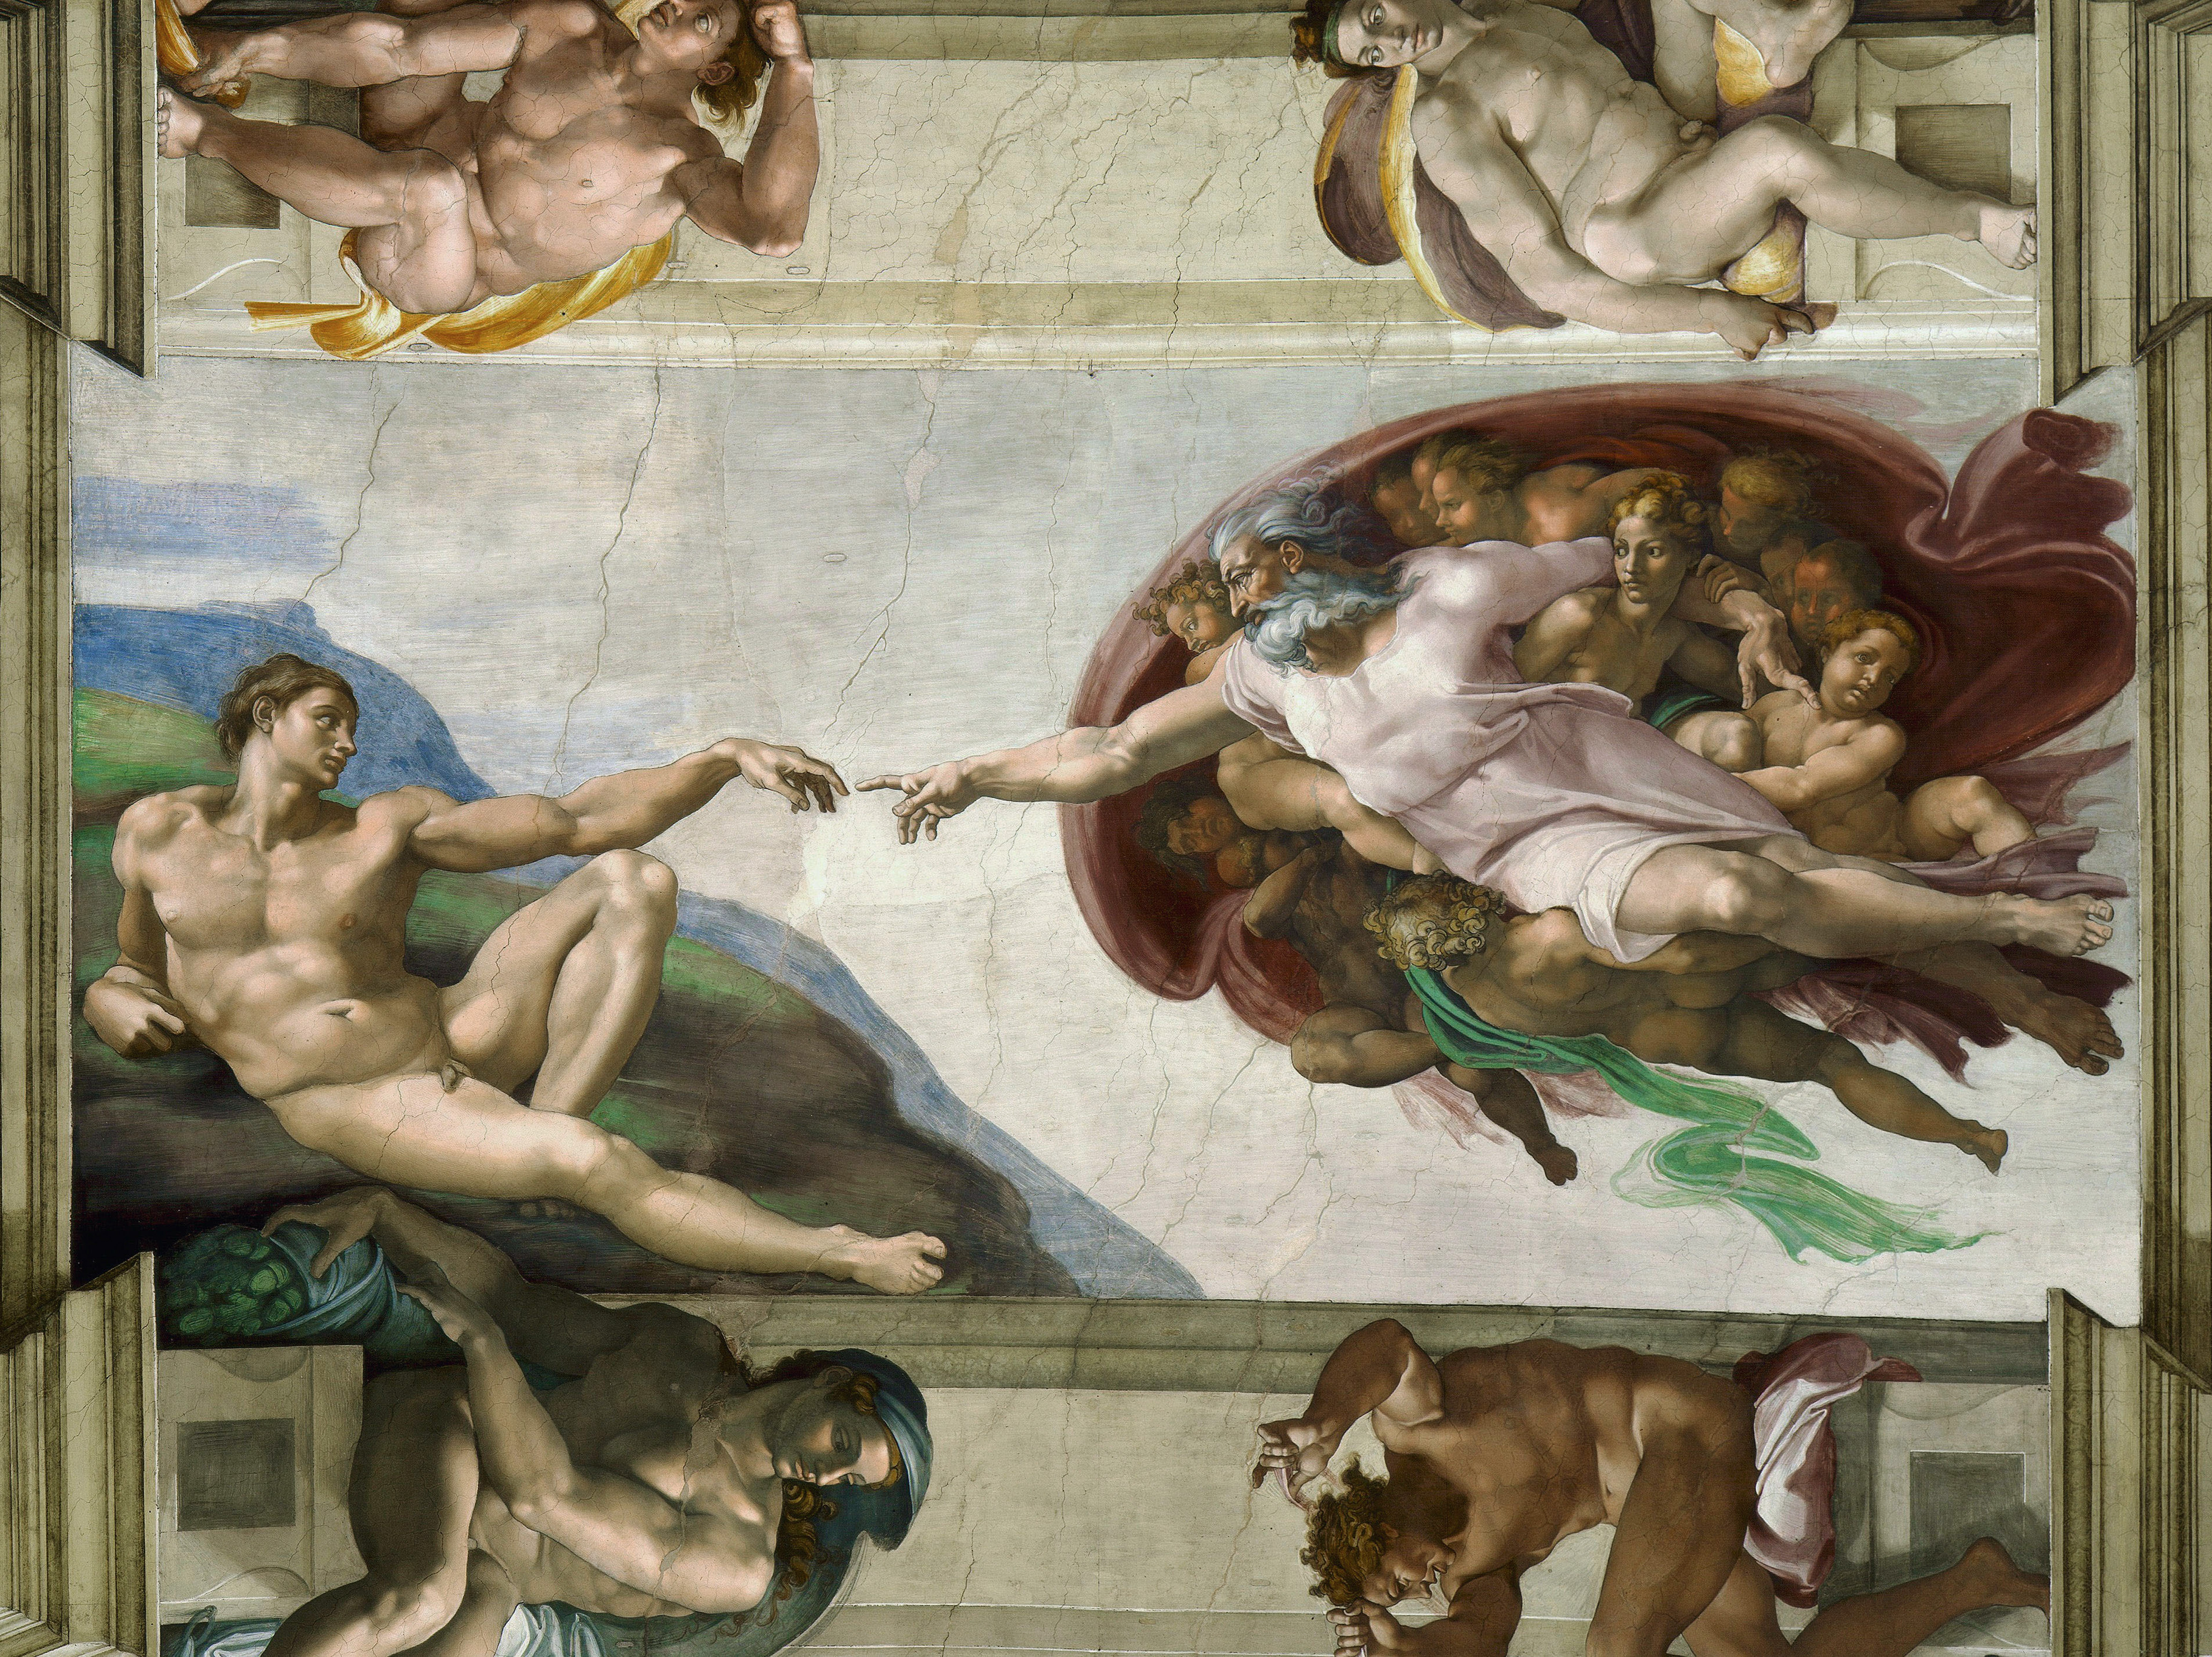 A portion of the Sistine Chapel ceiling showing God and Adam reaching toward one another.